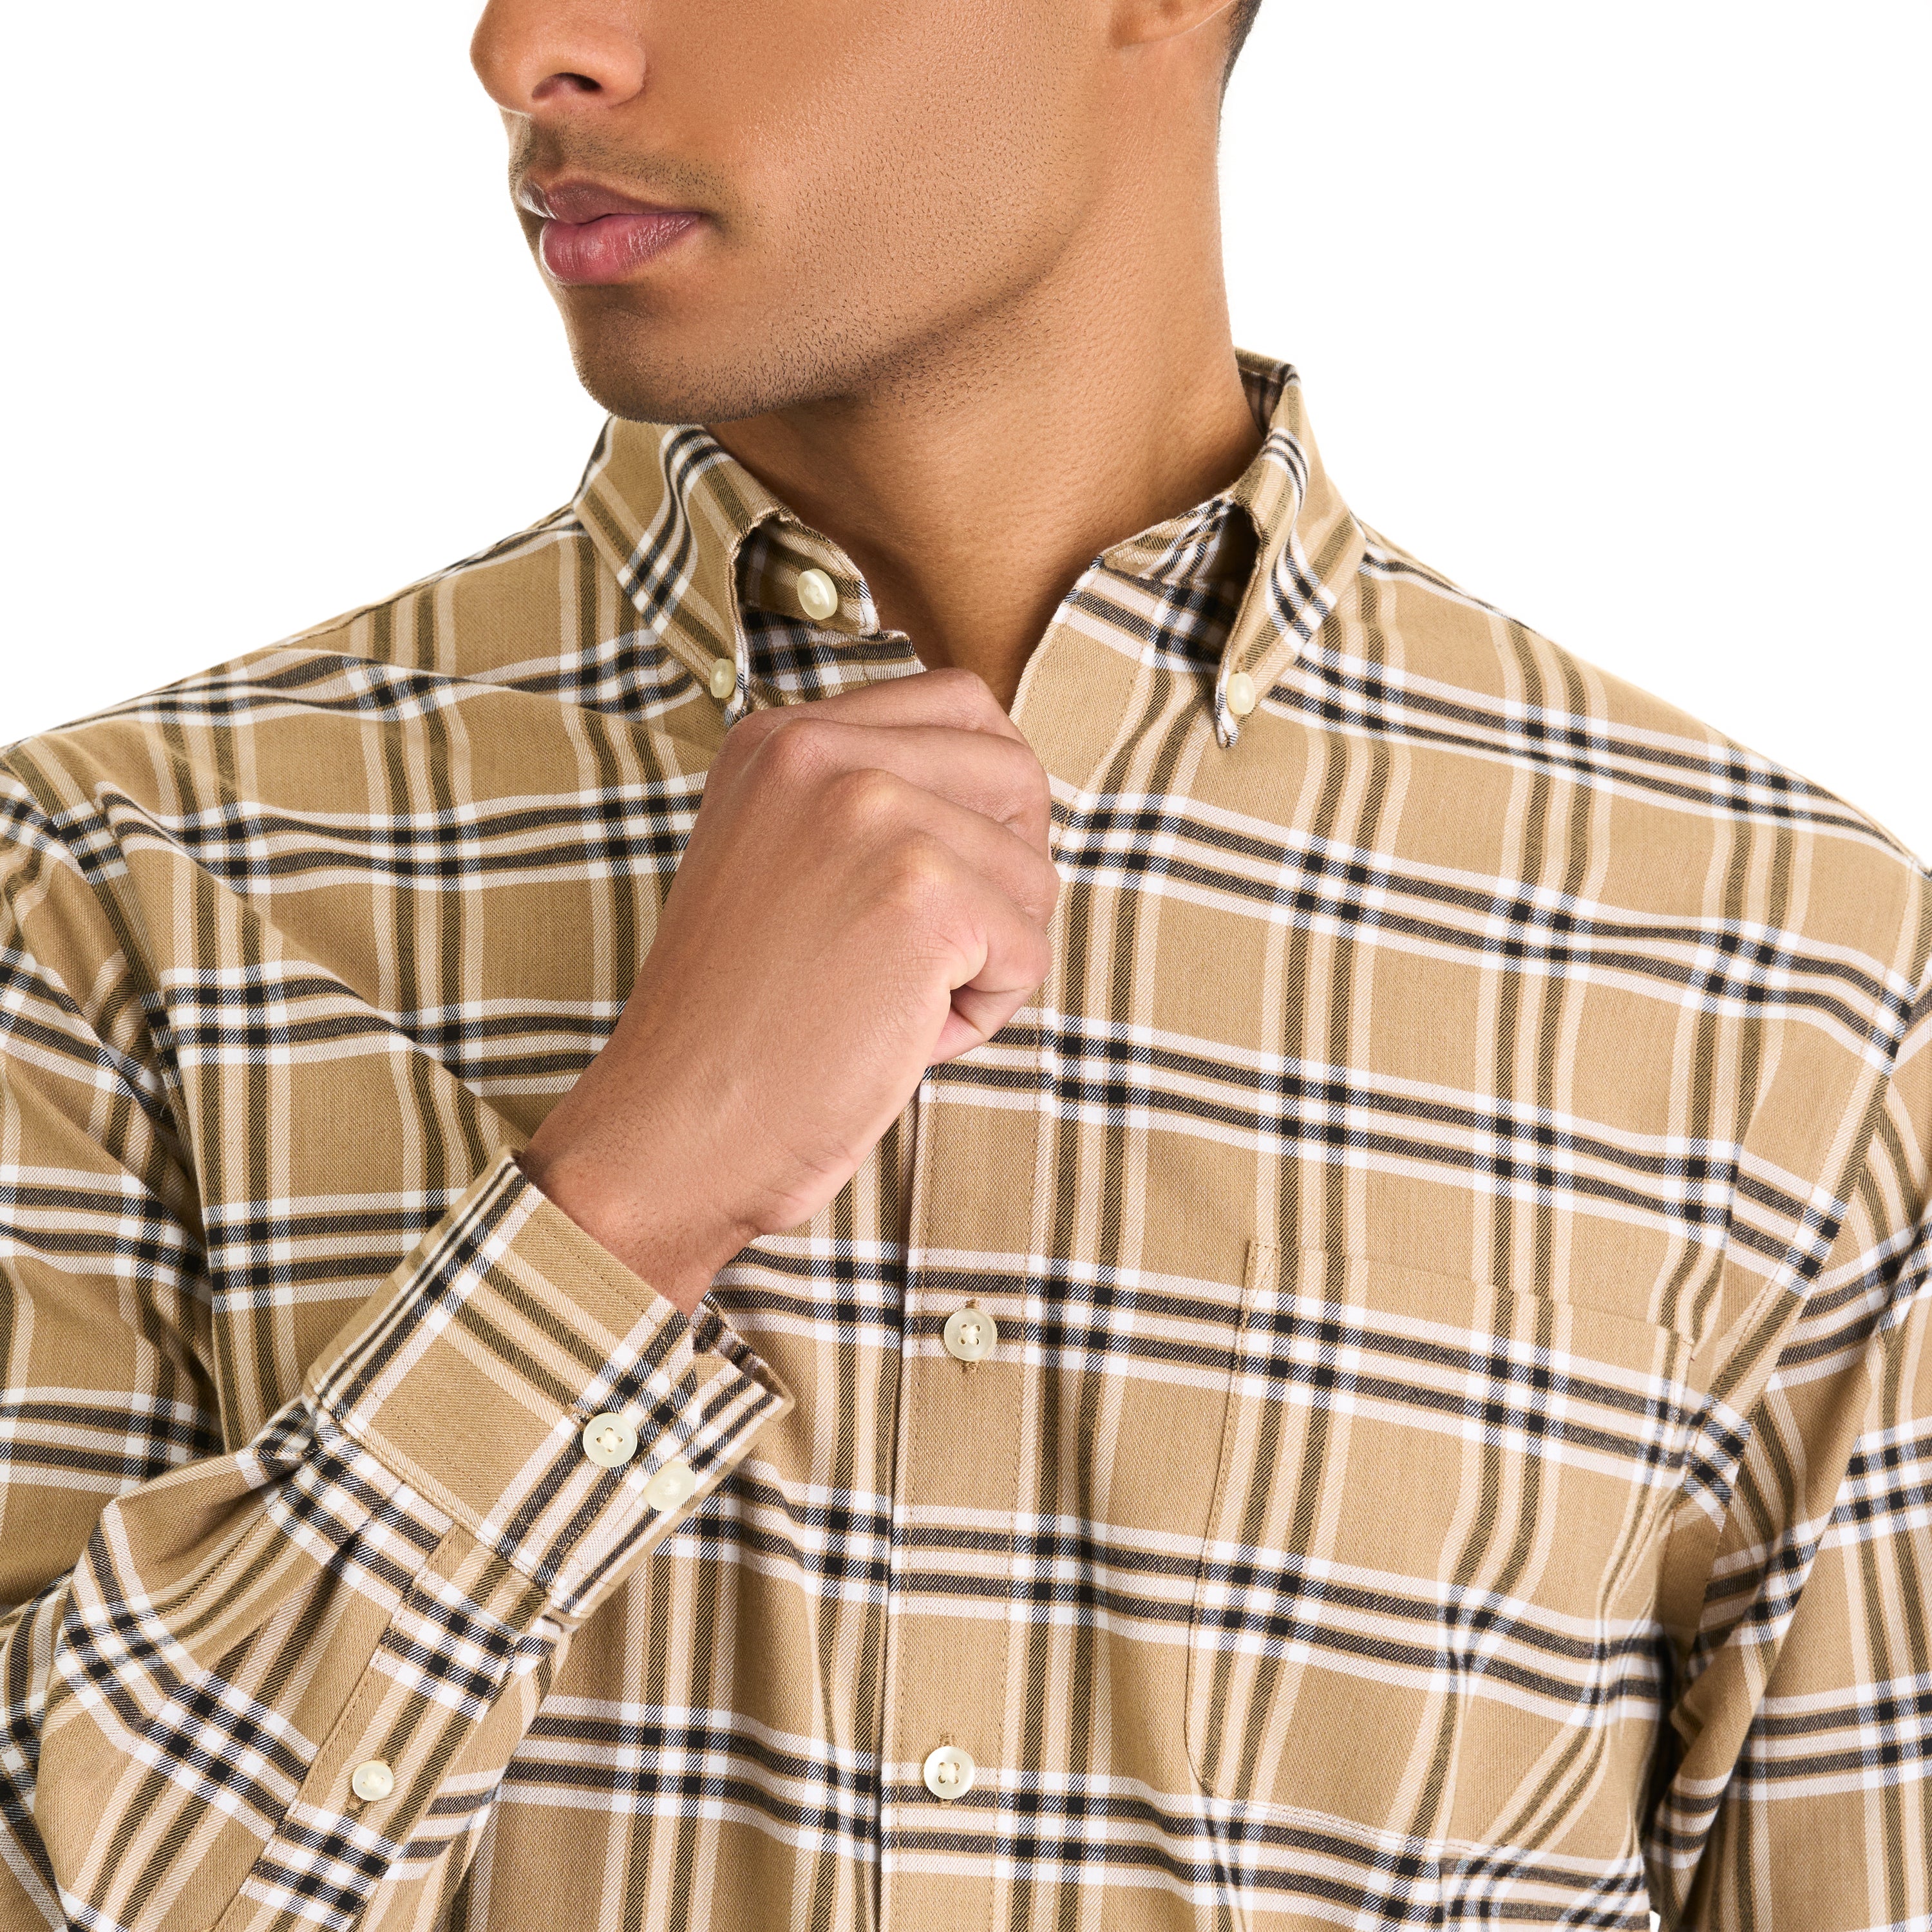 Weekend Twill Classic Plaid Long Sleeve Button Up Top – Regular Fit